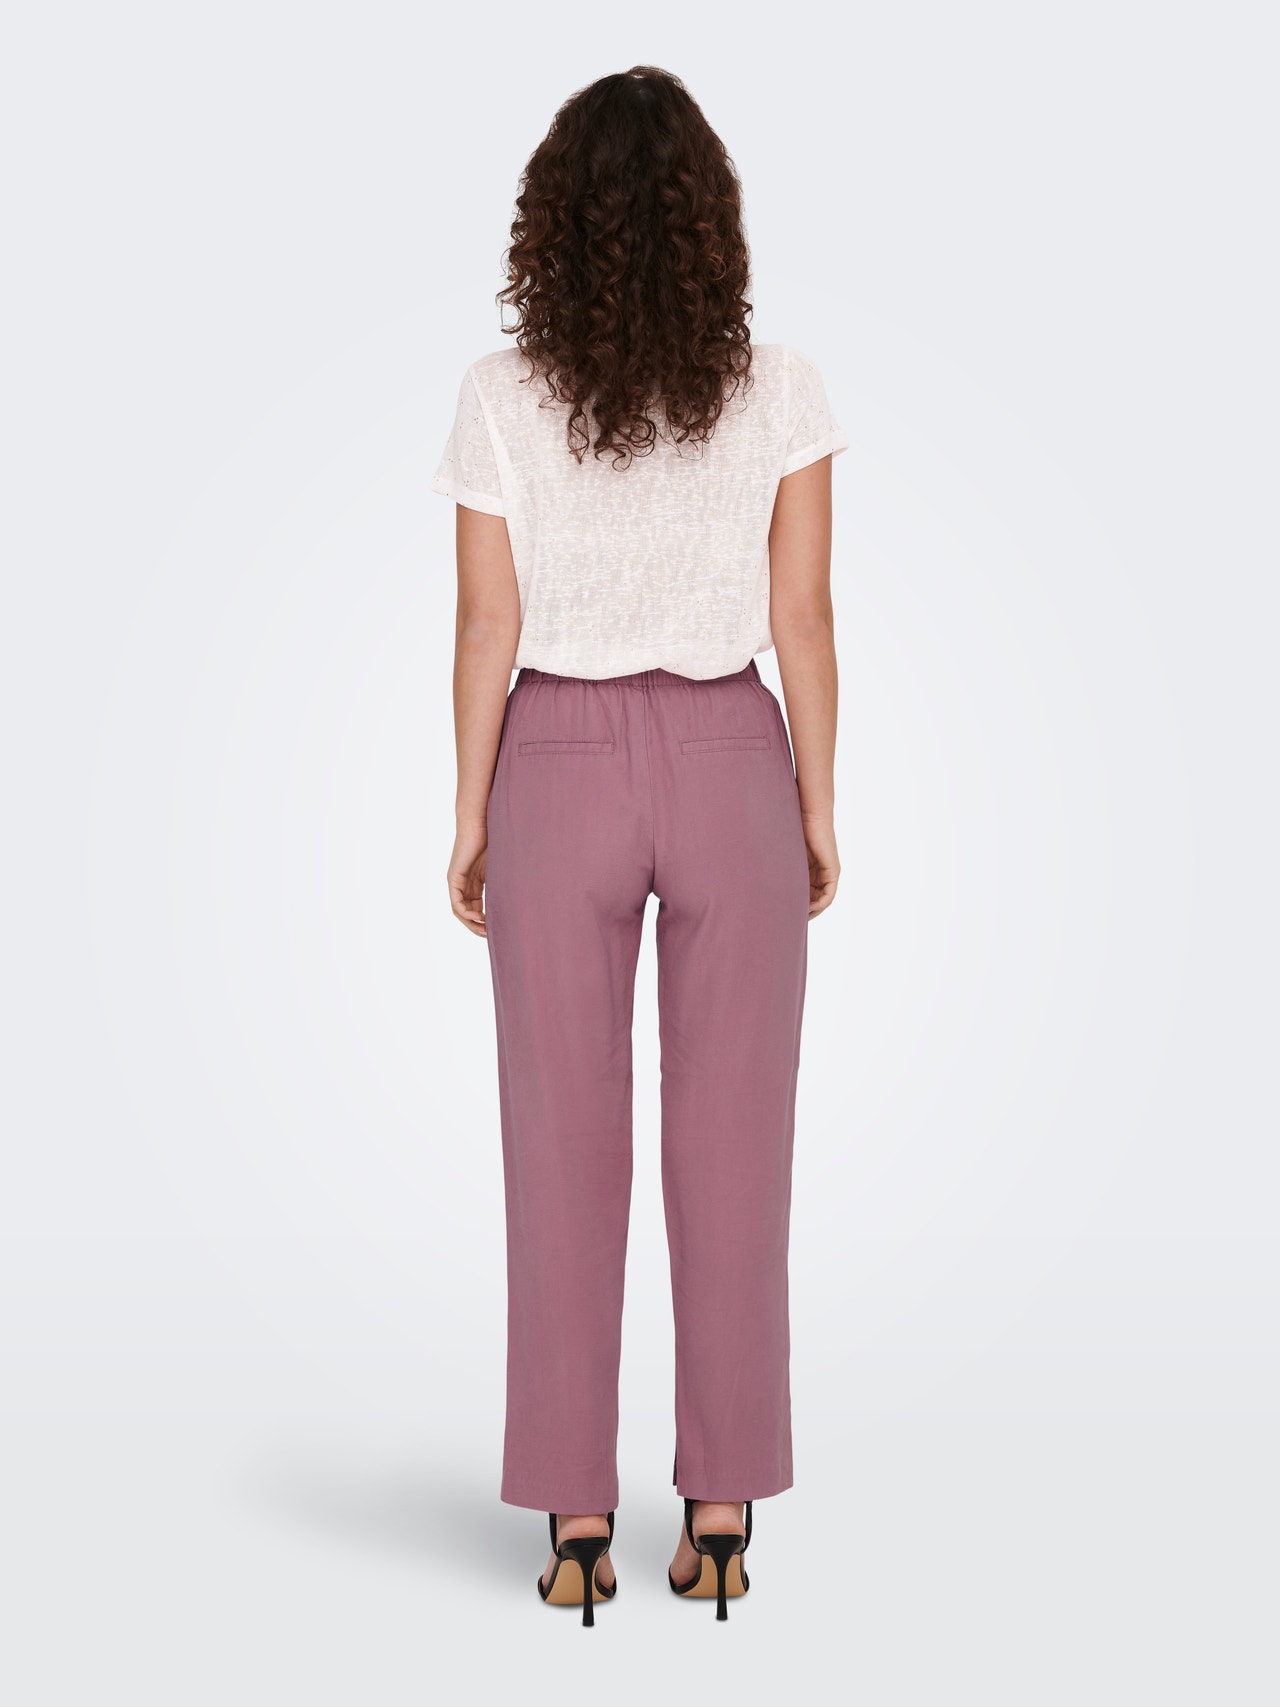 ONLY Highwaisted trousers -Nostalgia Rose - 15283605